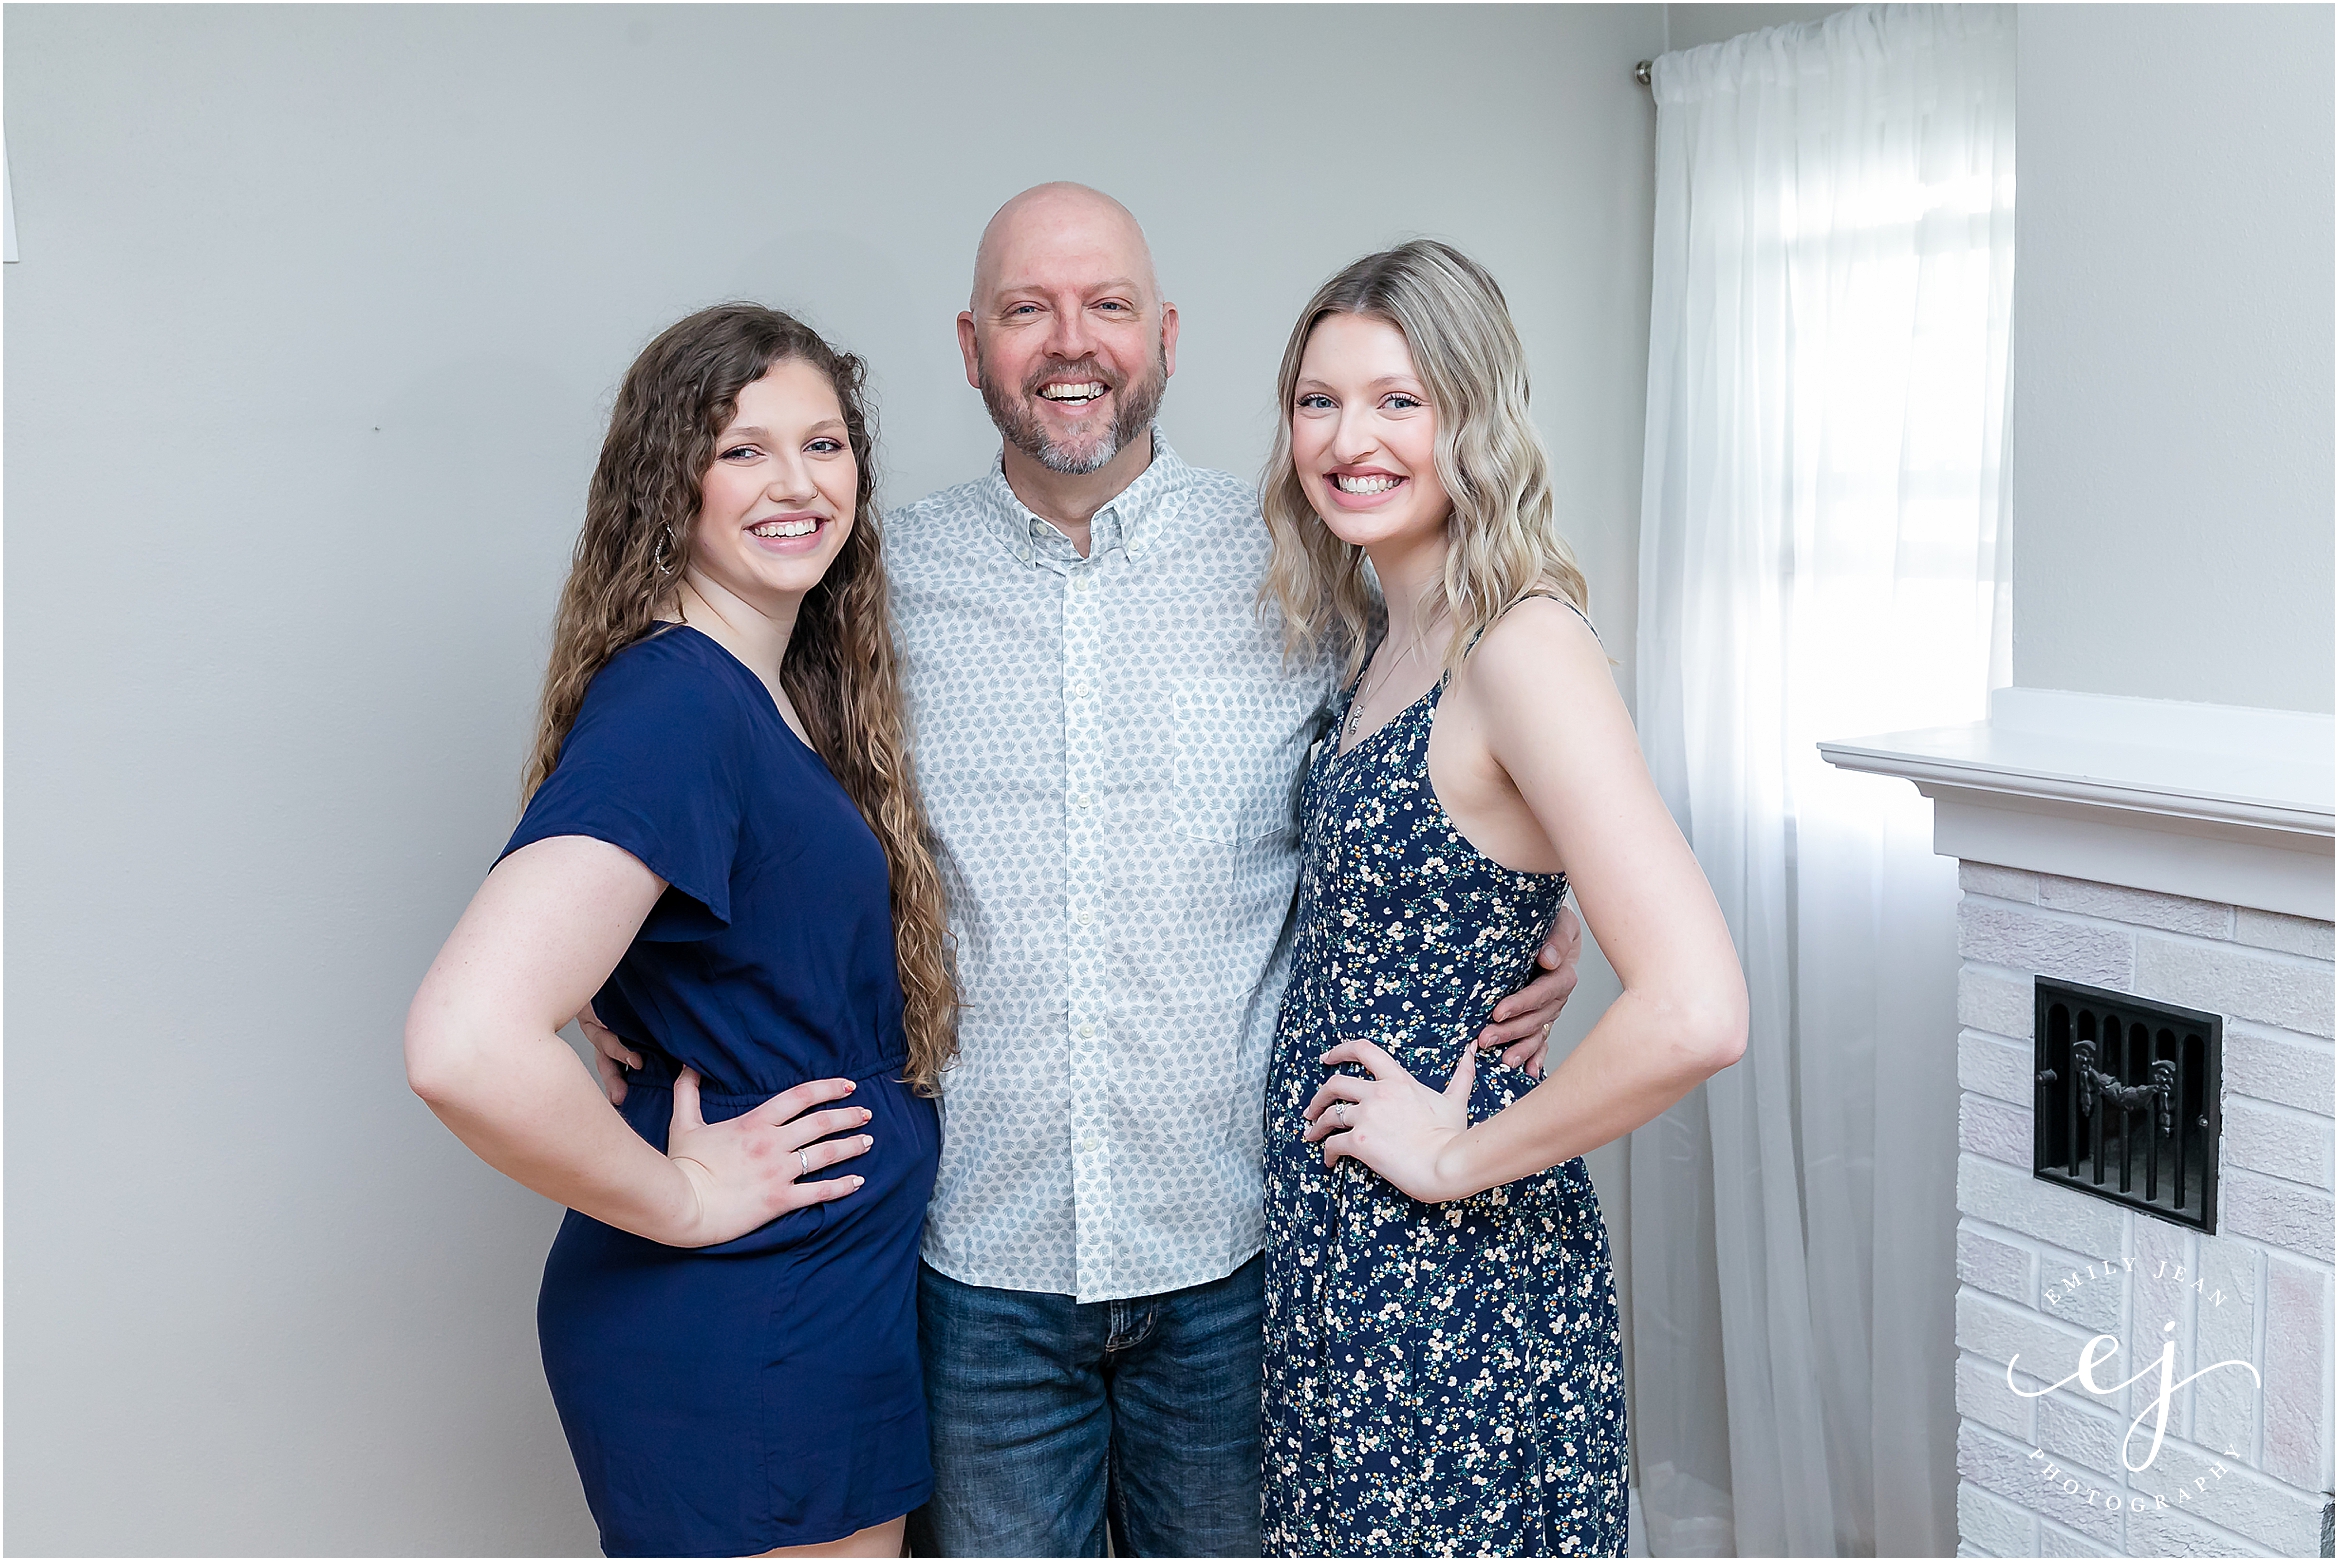 A dad standing with his two adult daughters smiling at the camera